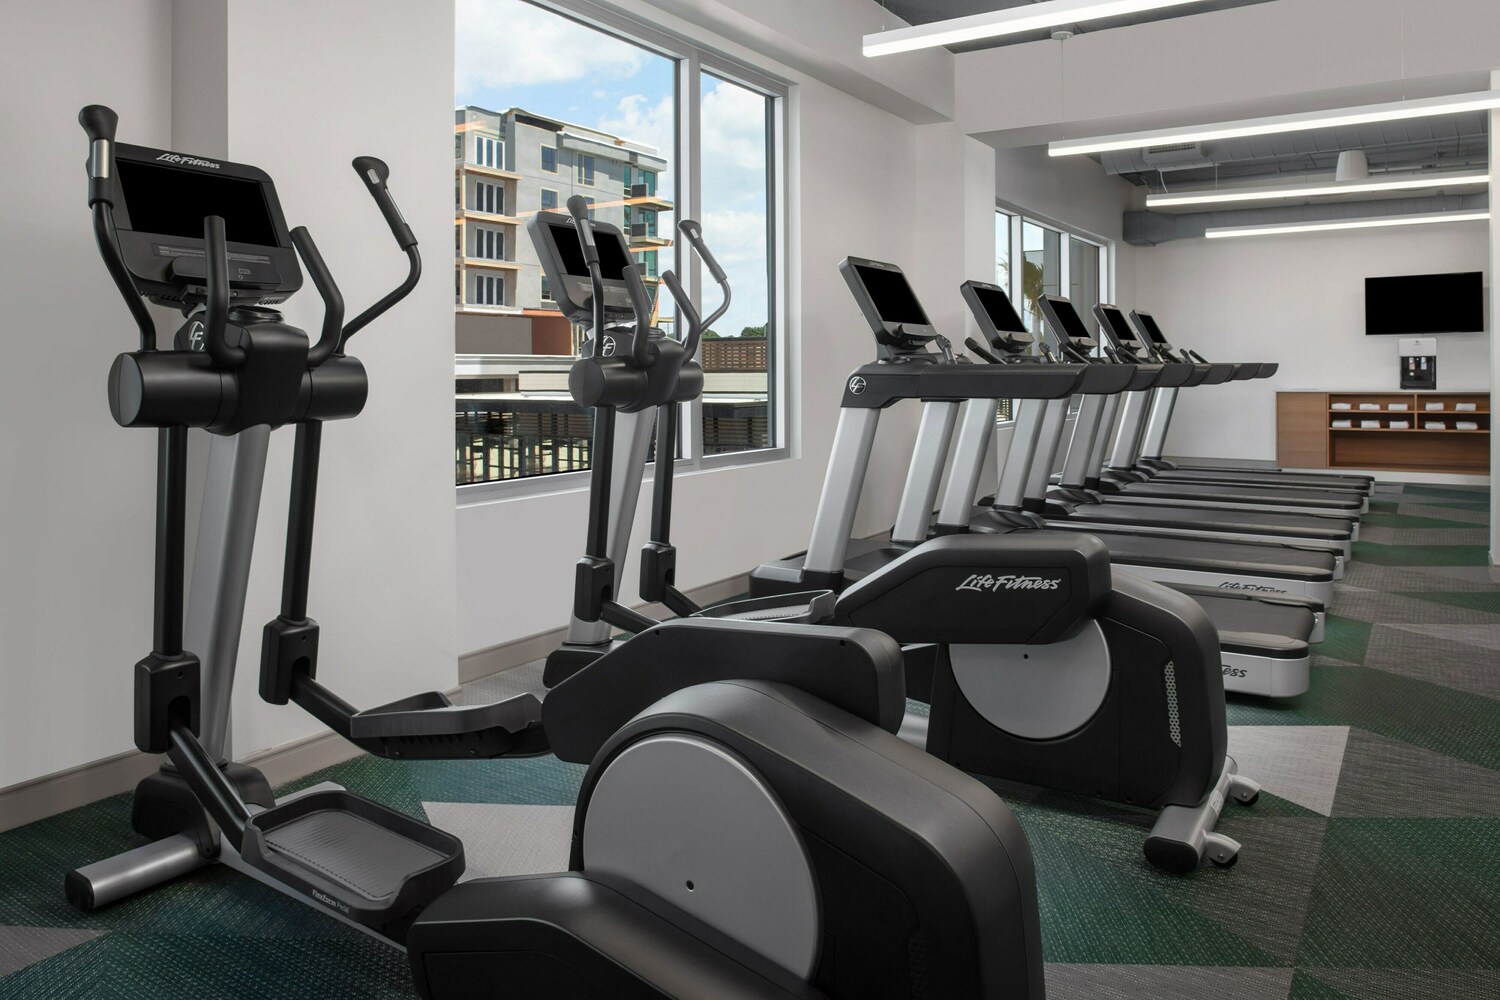 It's easy to maintain your healthy lifestyle at Element Tampa Midtown where you'll find an extensive fitness center offering ellipticals and treadmills with watch screens, a hydration station and more